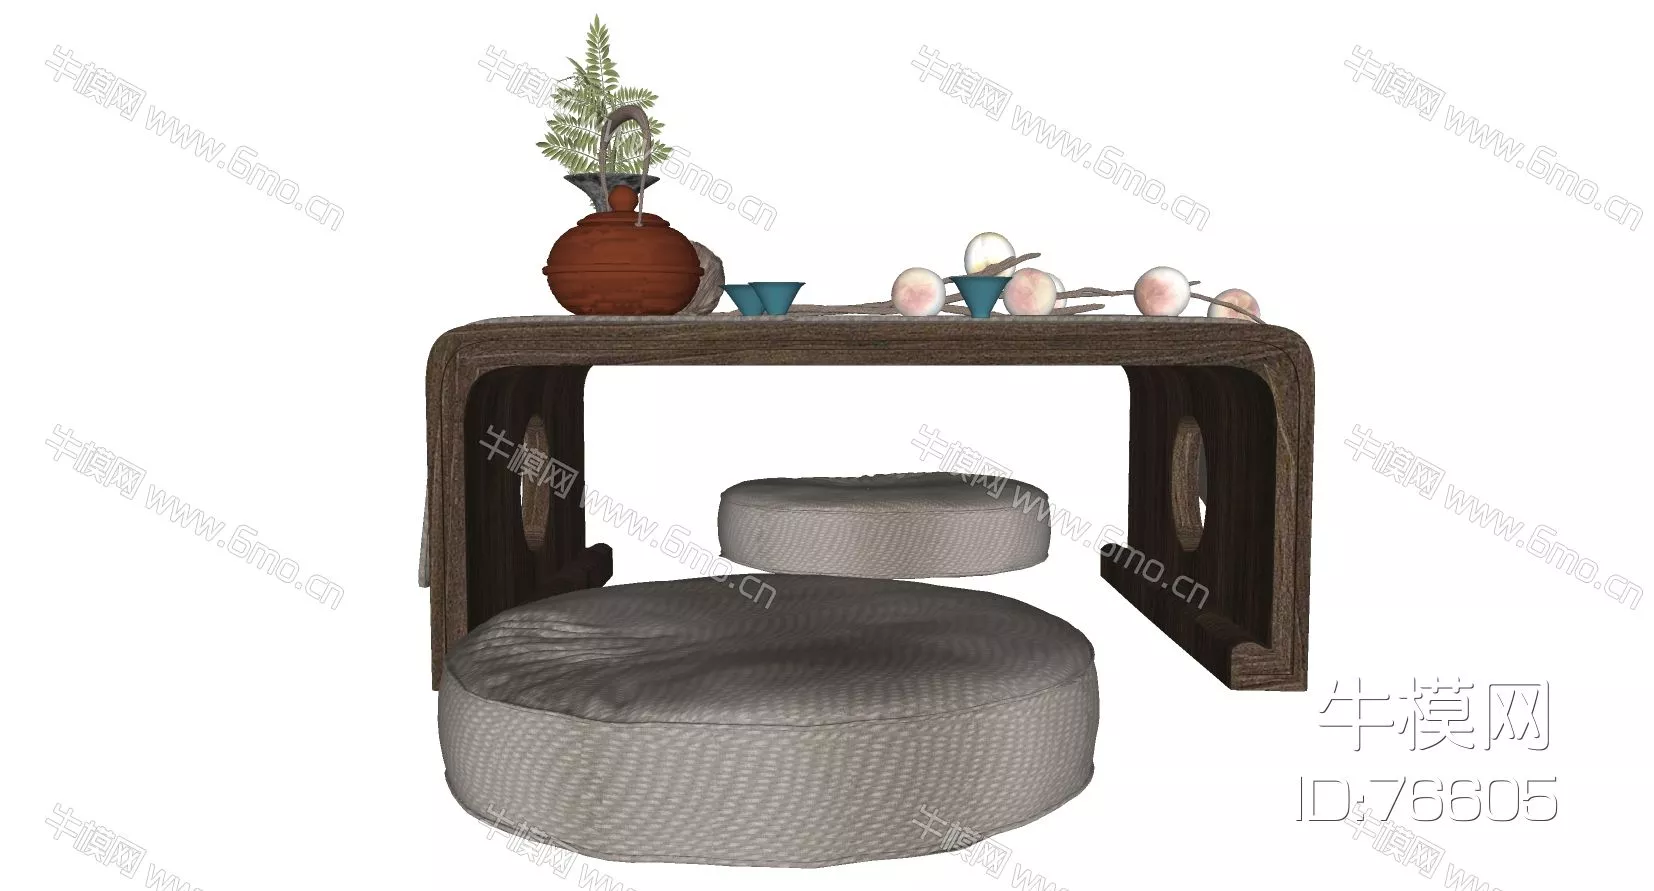 CHINESE COFFEE TABLE - SKETCHUP 3D MODEL - VRAY - 76605